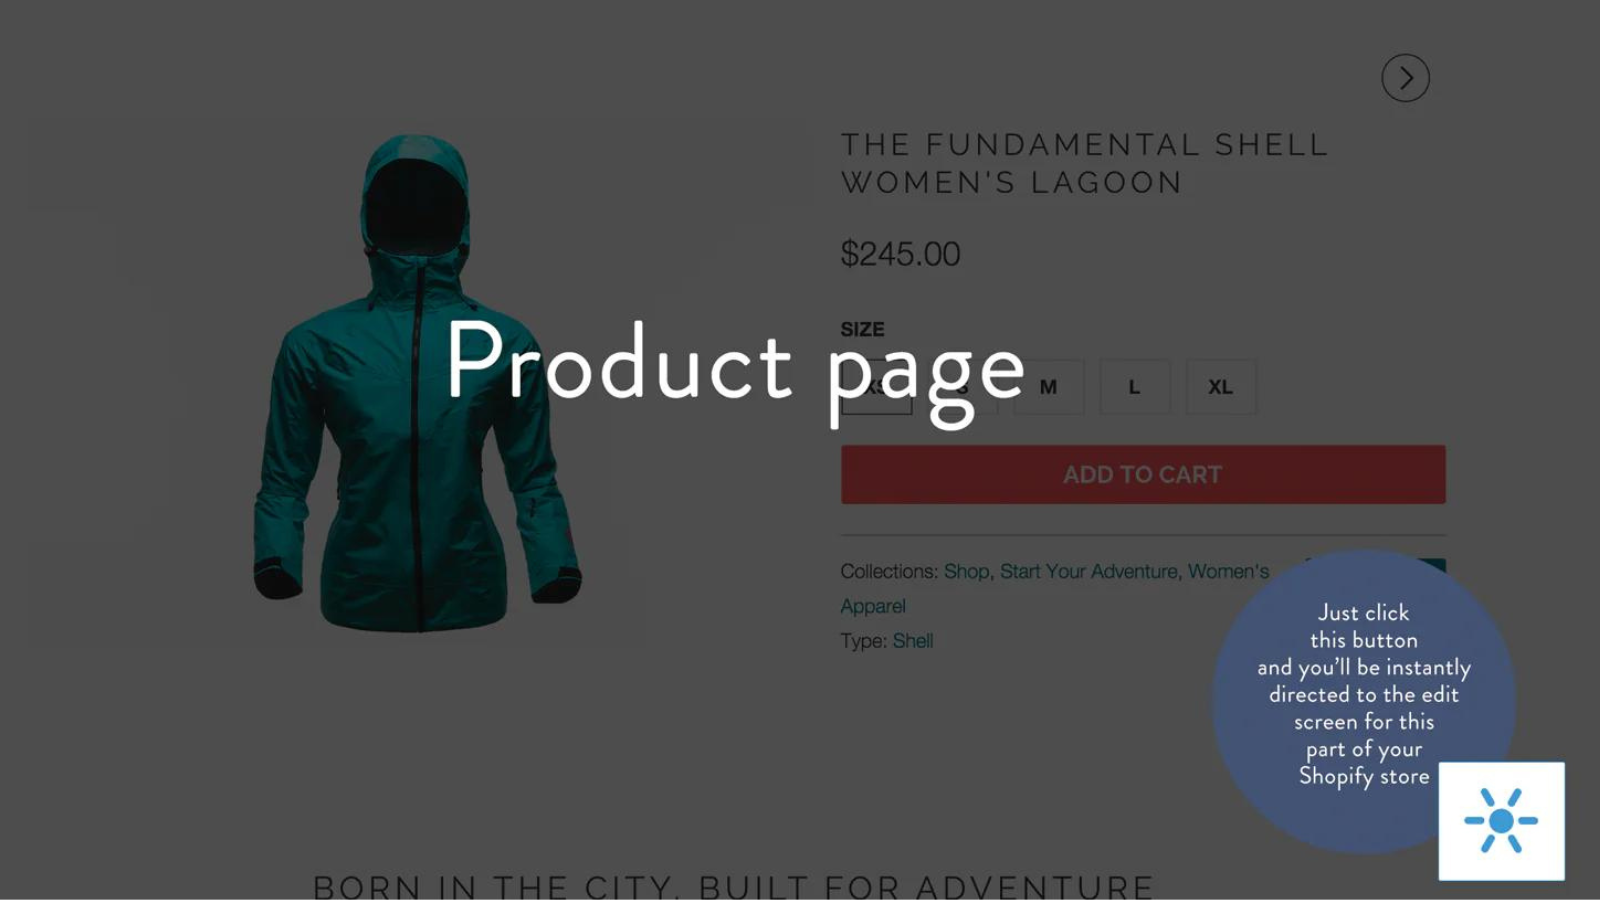 Product page edit button